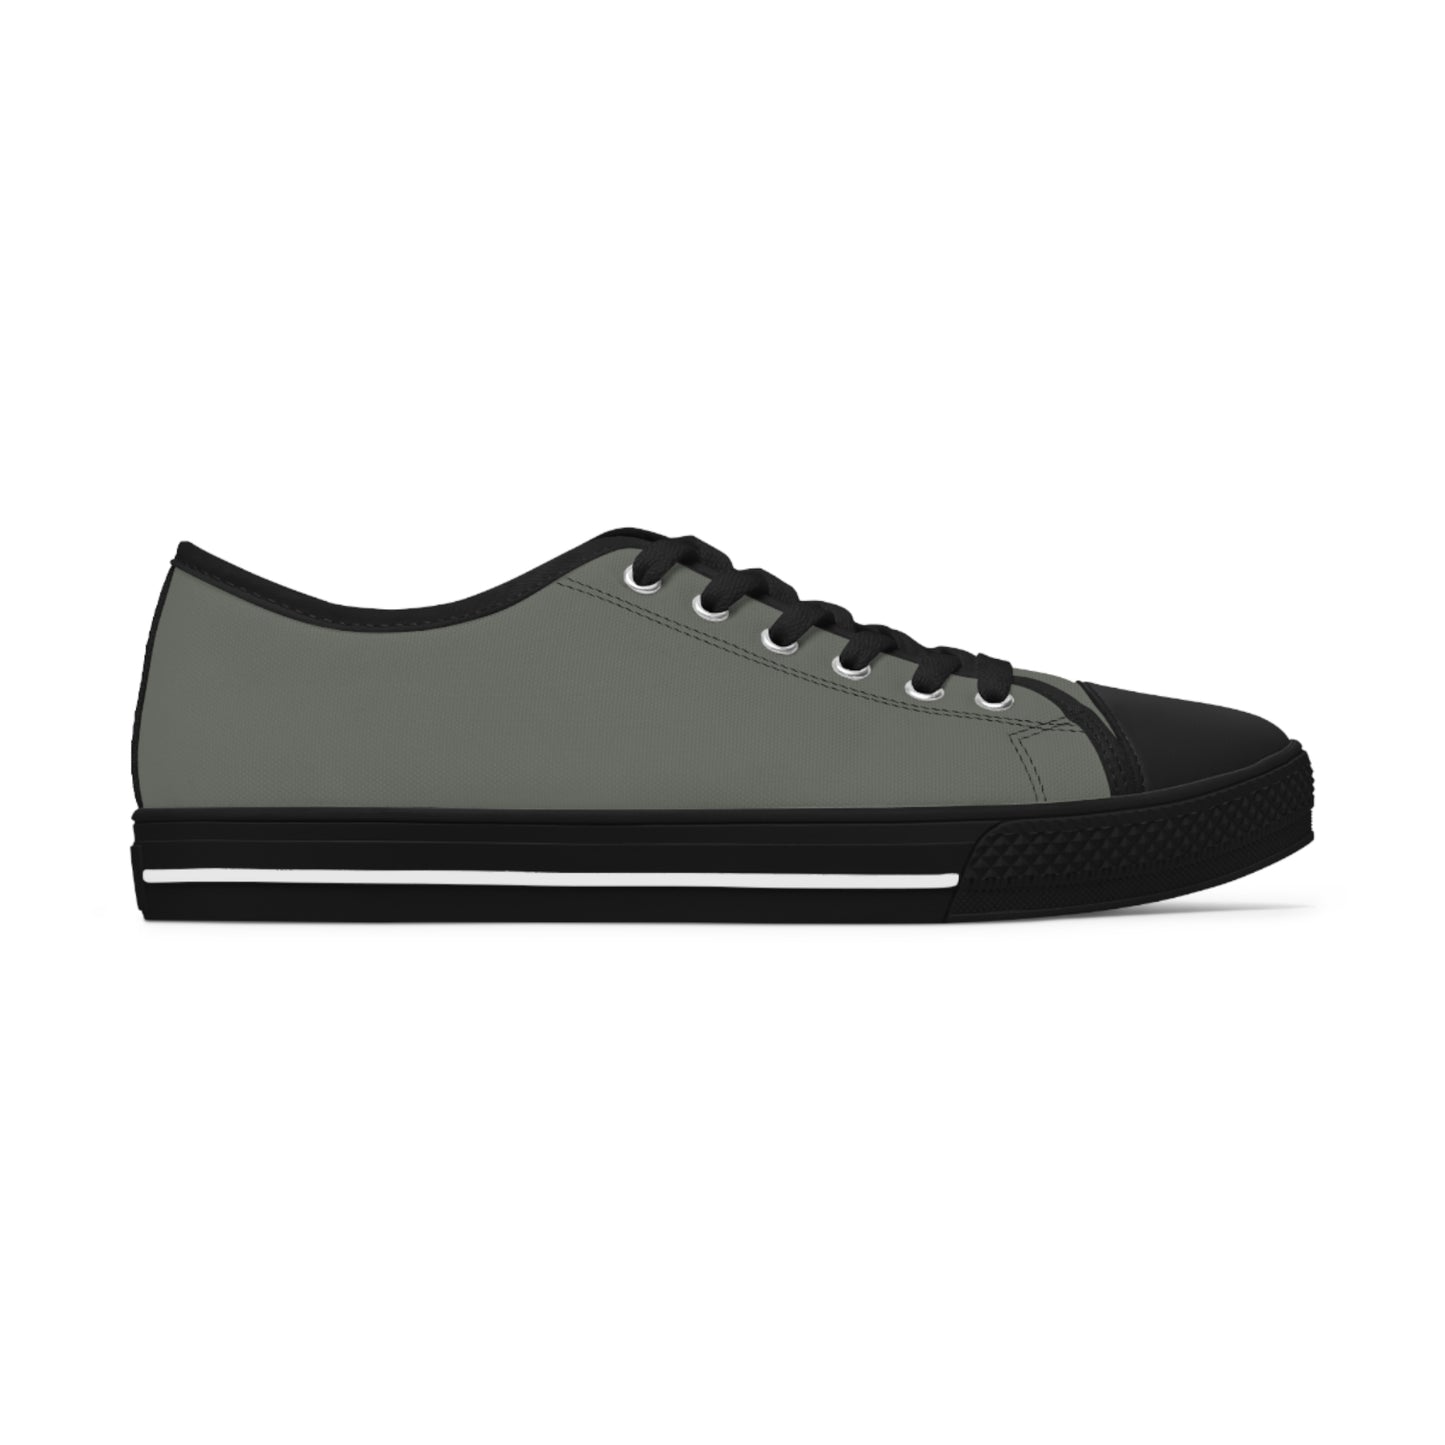 Women's Canvas Low Top Solid Color Sneakers - Drab Olive Gray US 12 White sole